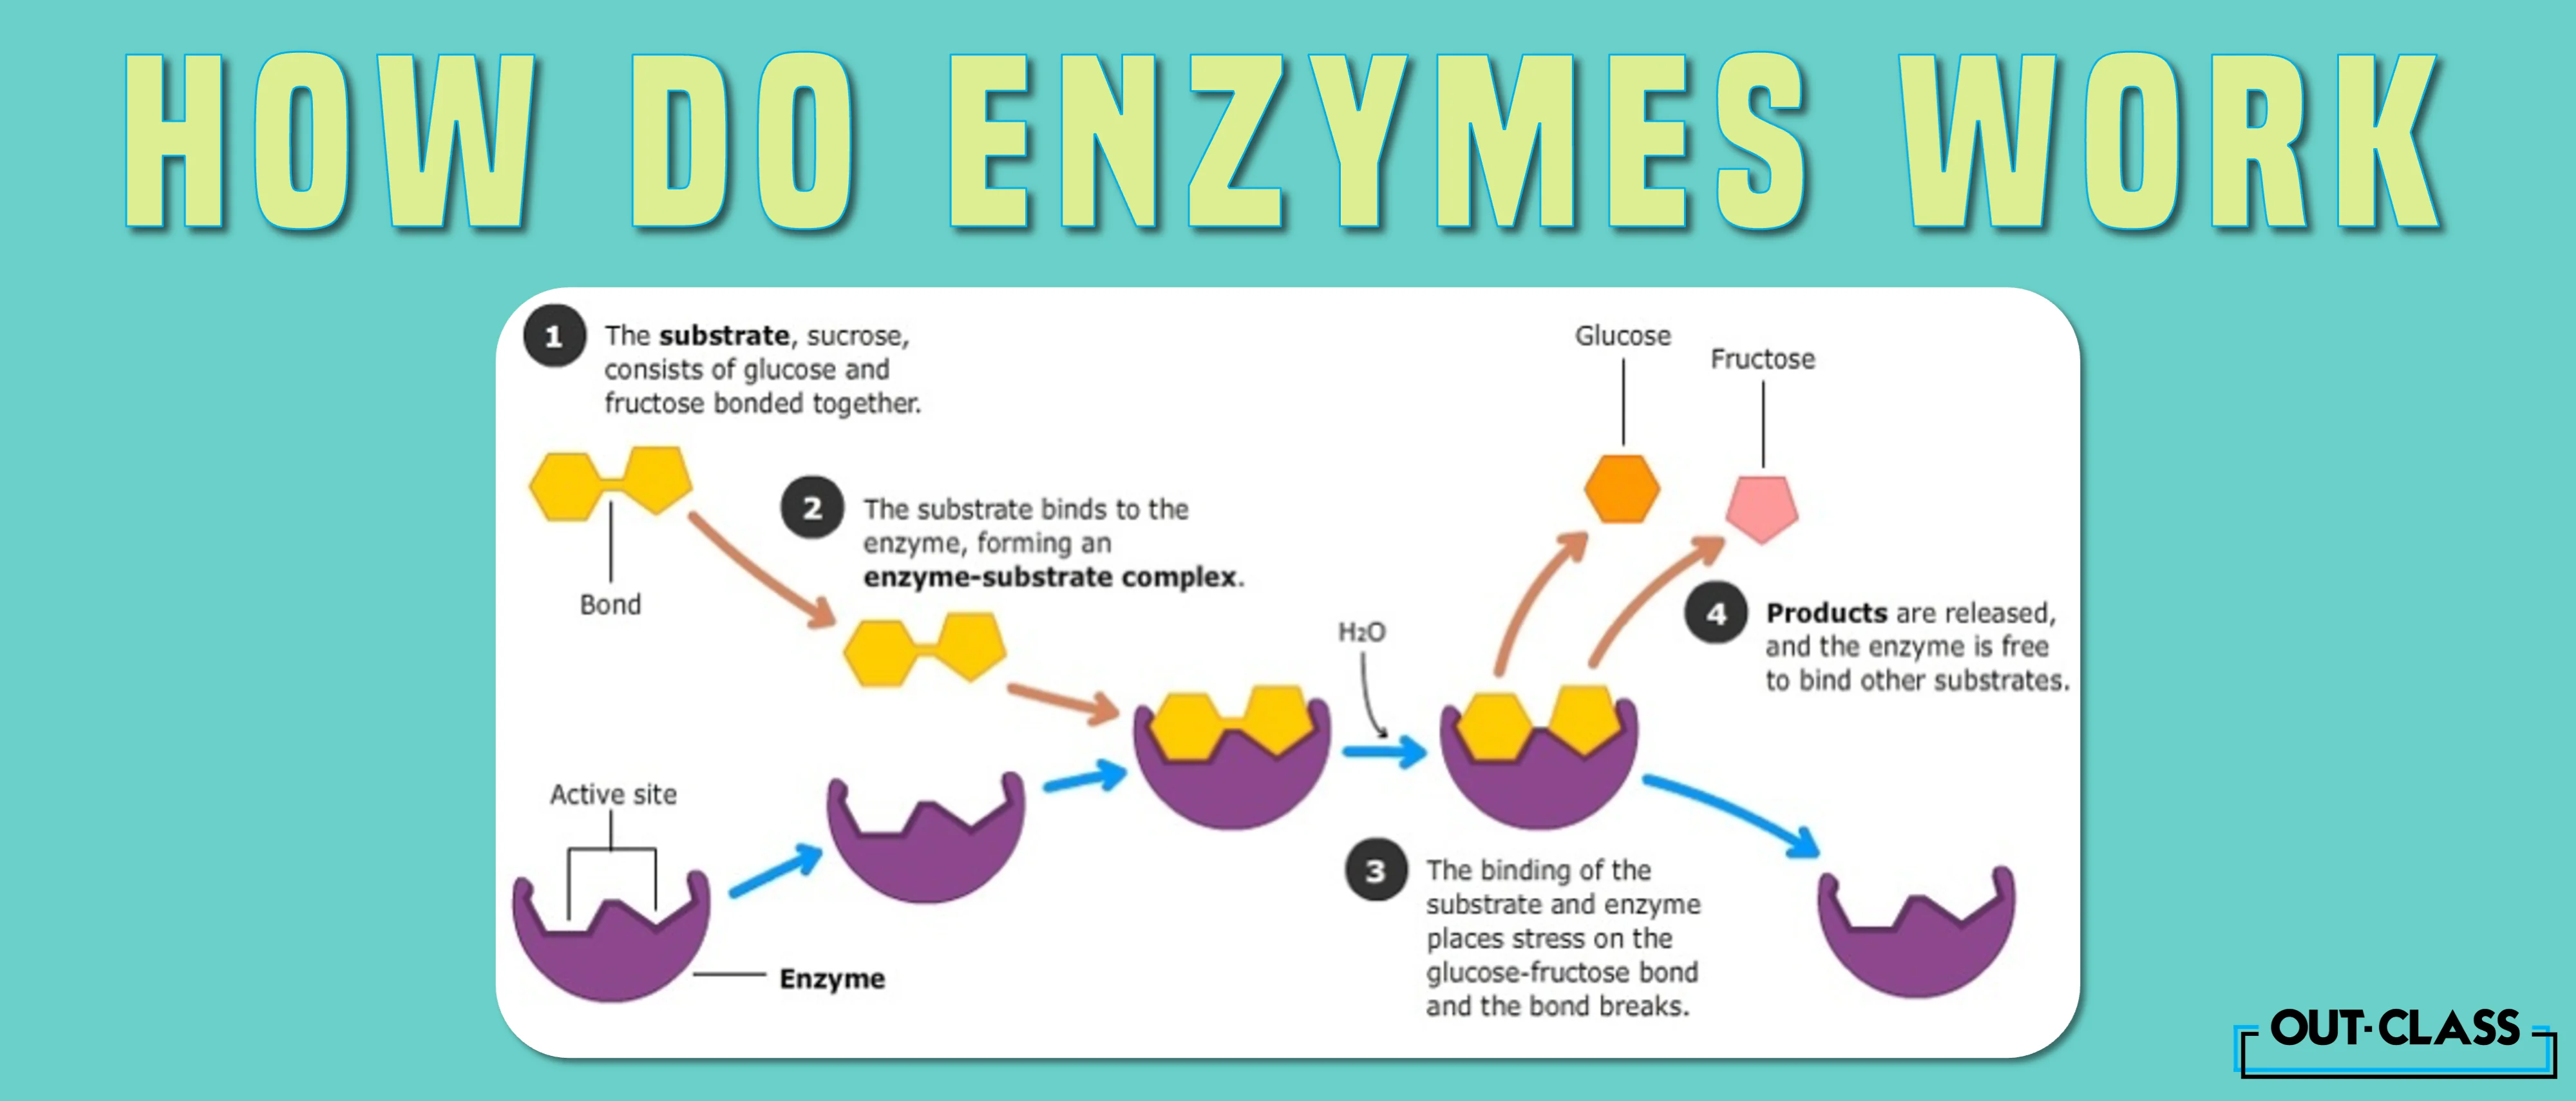 labeled enzymes lock and key